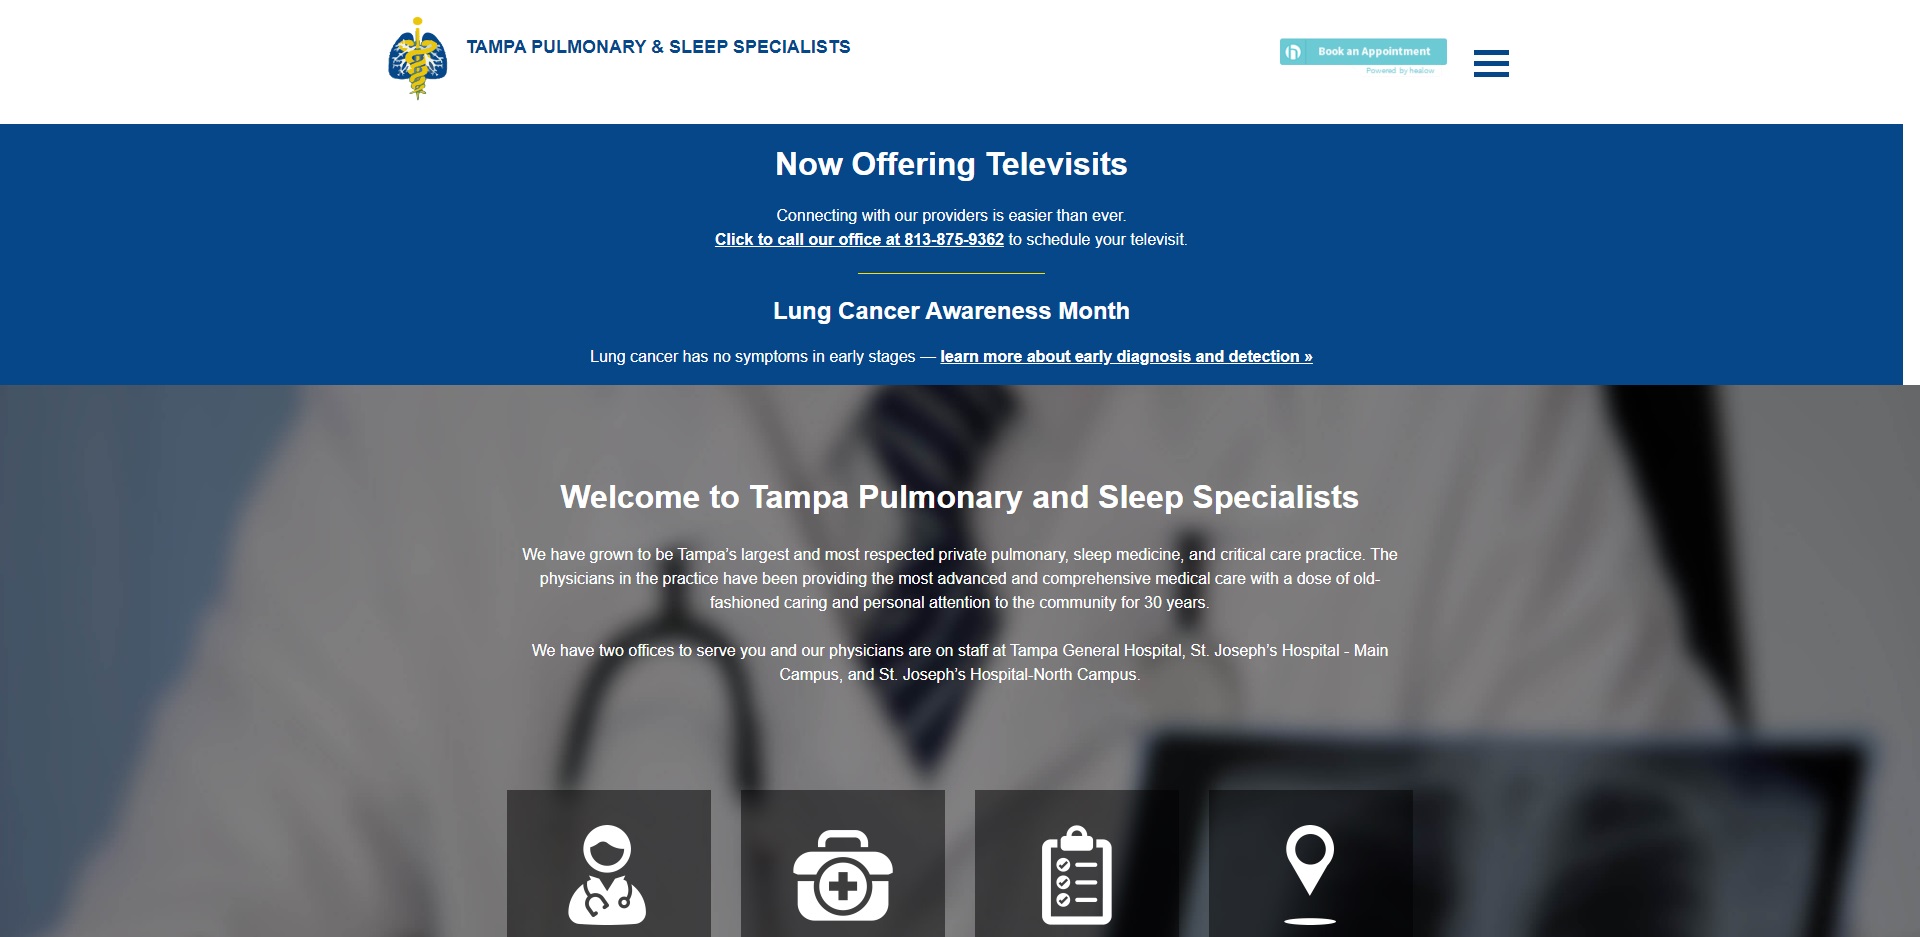 The Best Sleep Specialists in Tampa, FL